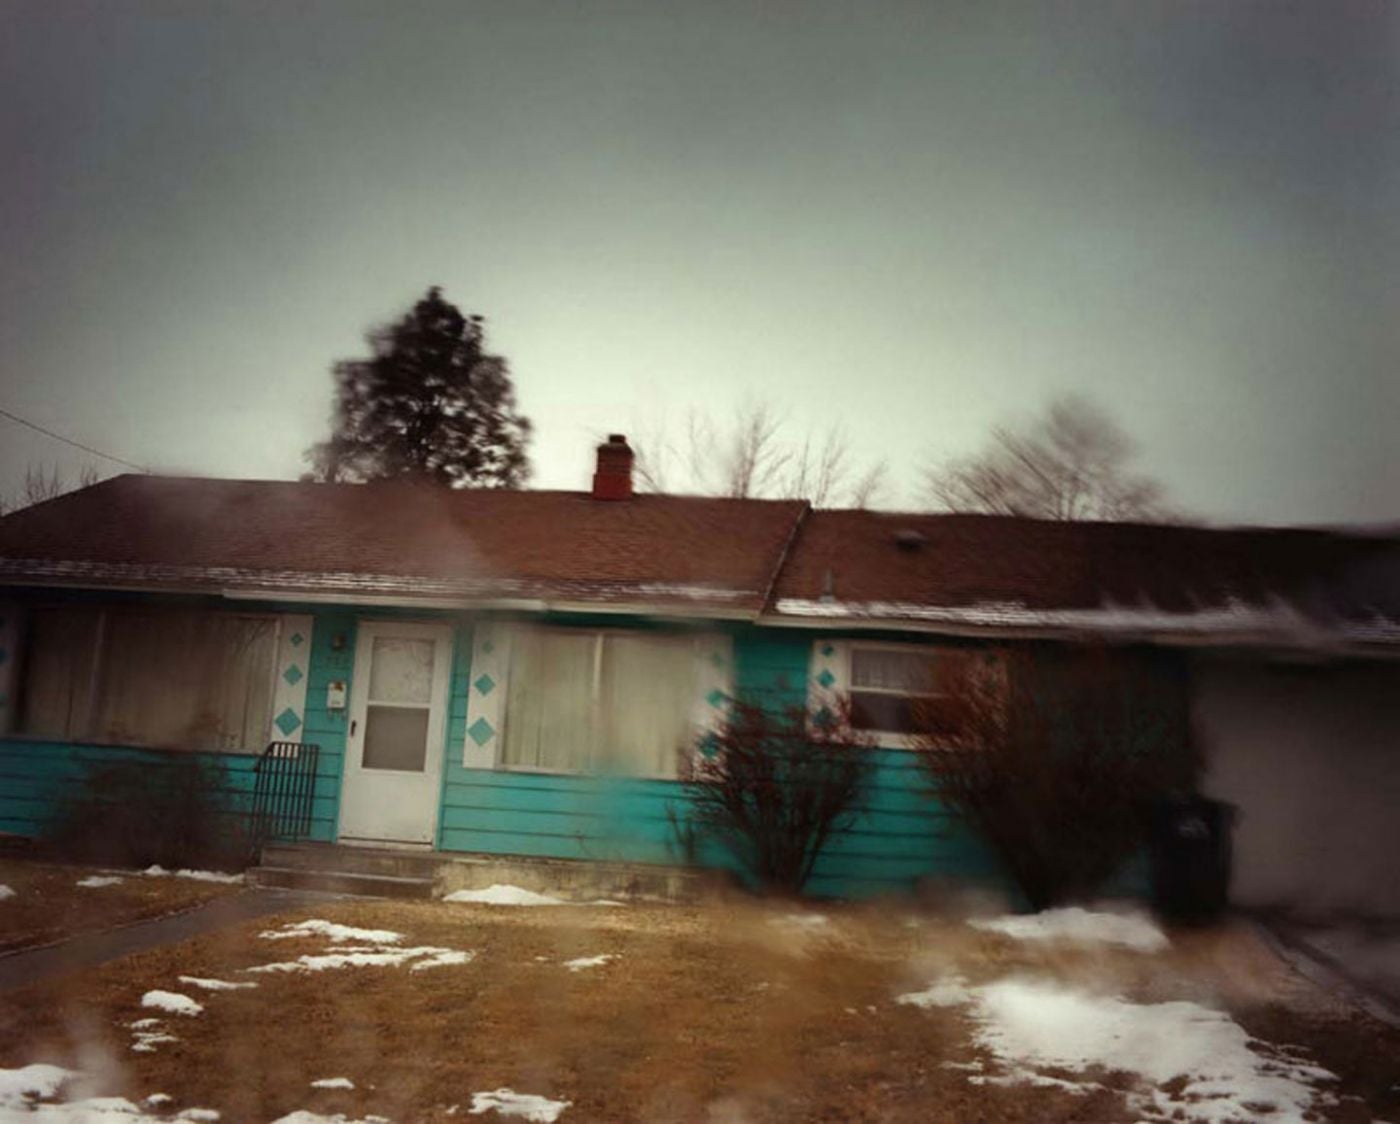 Todd Hido: Excerpts from Silver Meadows, Deluxe Limited Edition